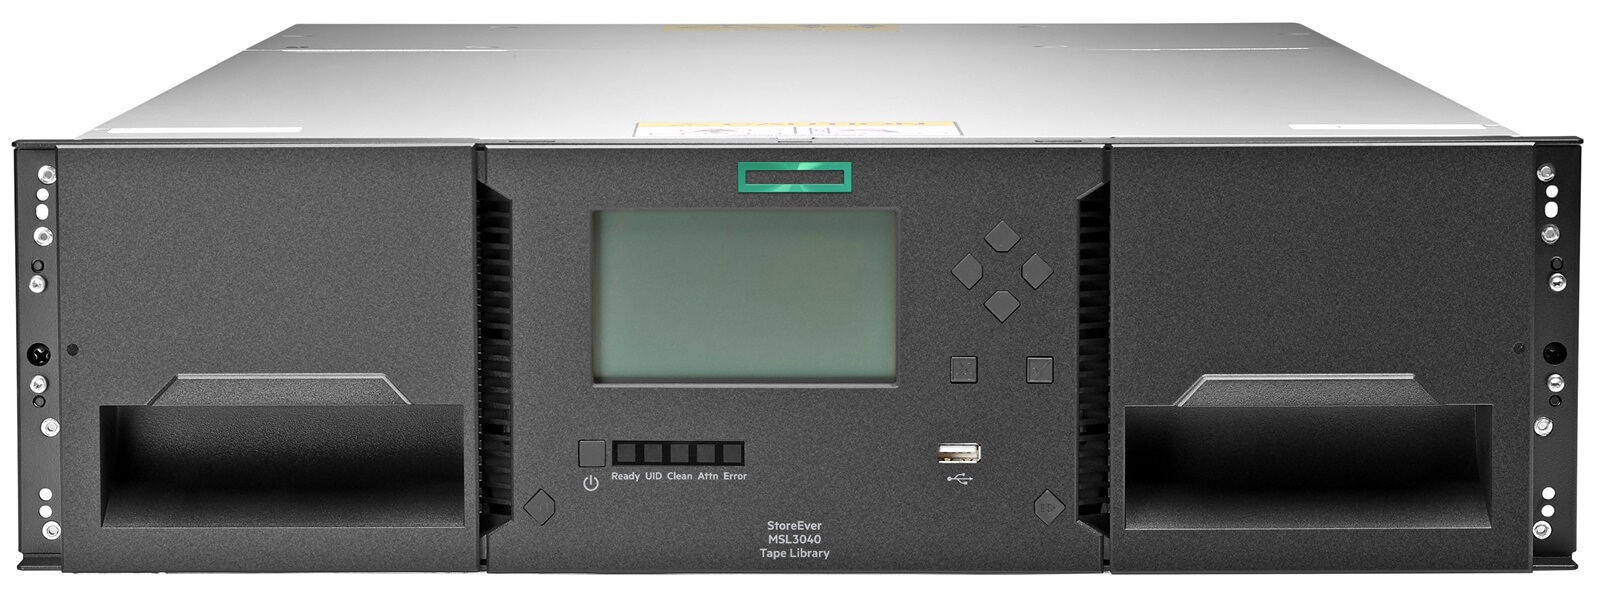 Drive LTO HPE StoreEver MSL3040 Tape Library